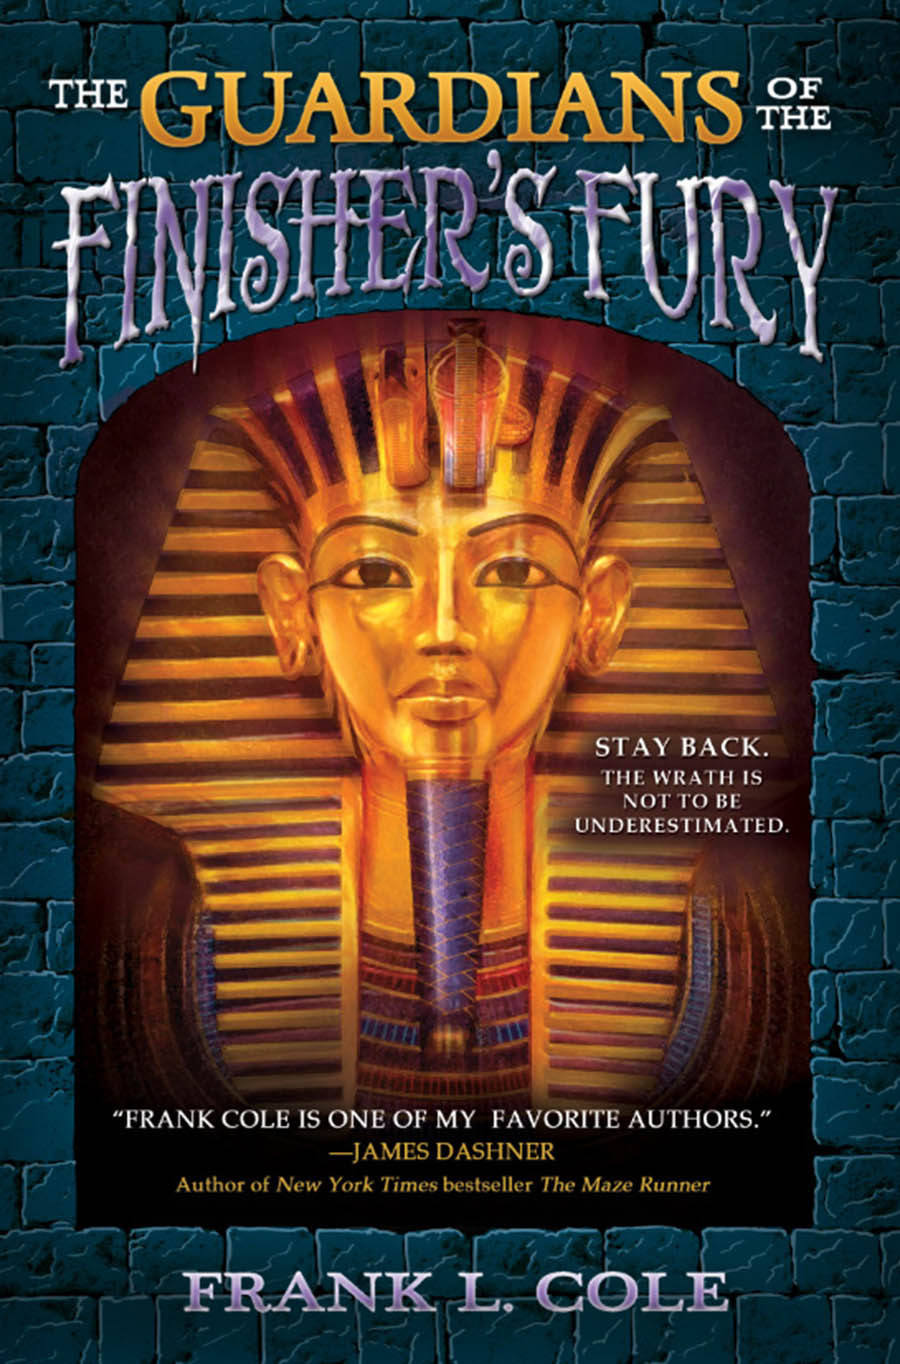 Cover for The Guardians of the Finishers Fury; an image of an Egyptian sarcophagus.